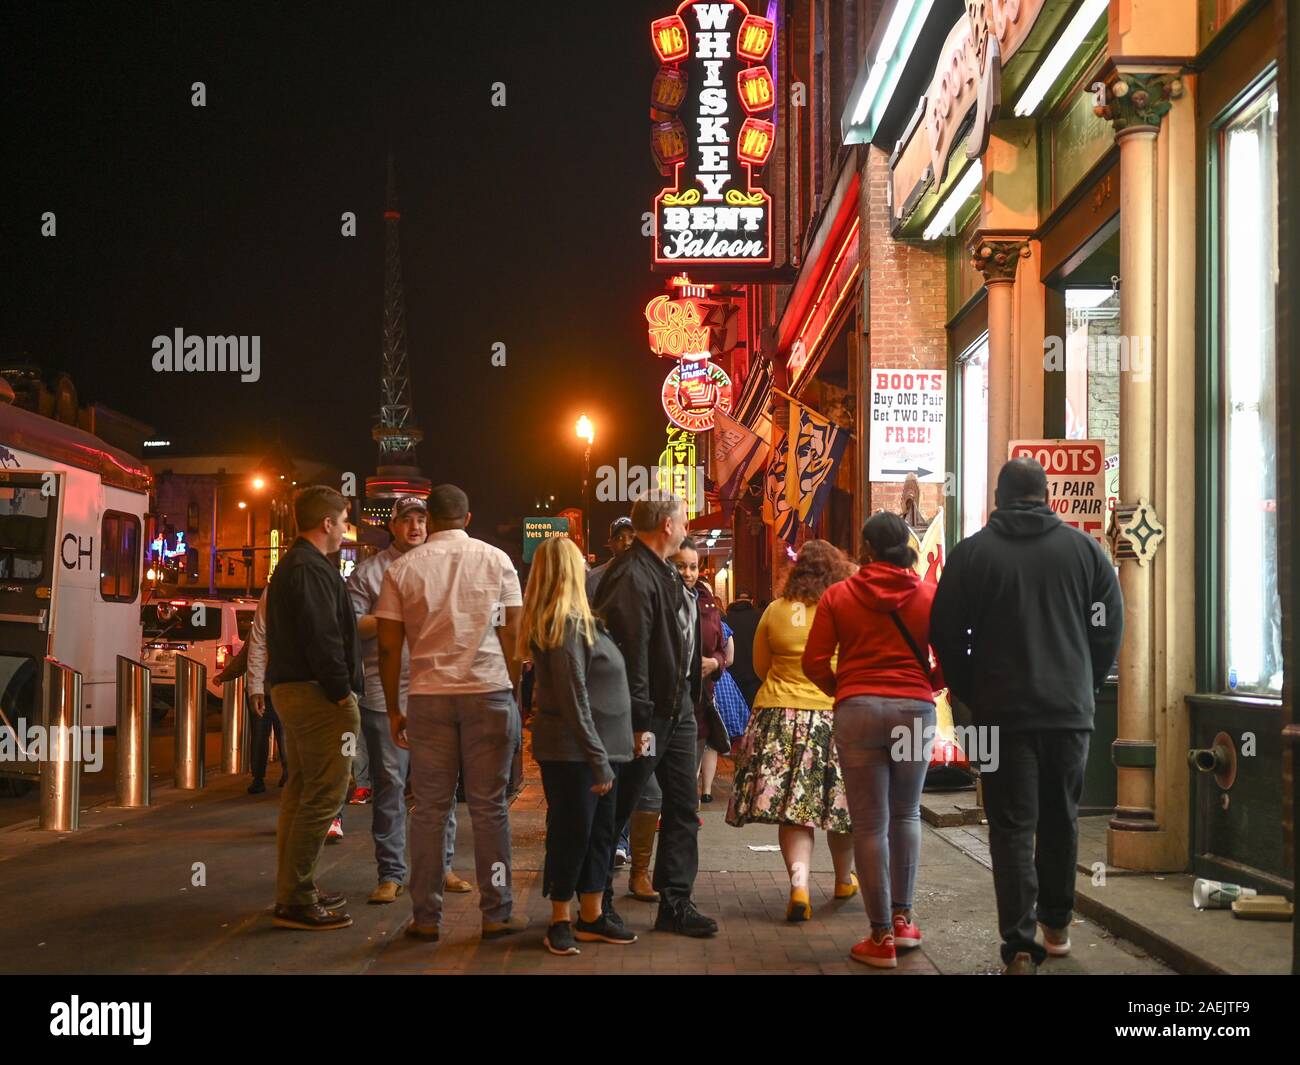 People enjoy Broadway by night in Nashville. This historic street in Music Row is famous for its nightlife and country music bars. Stock Photo